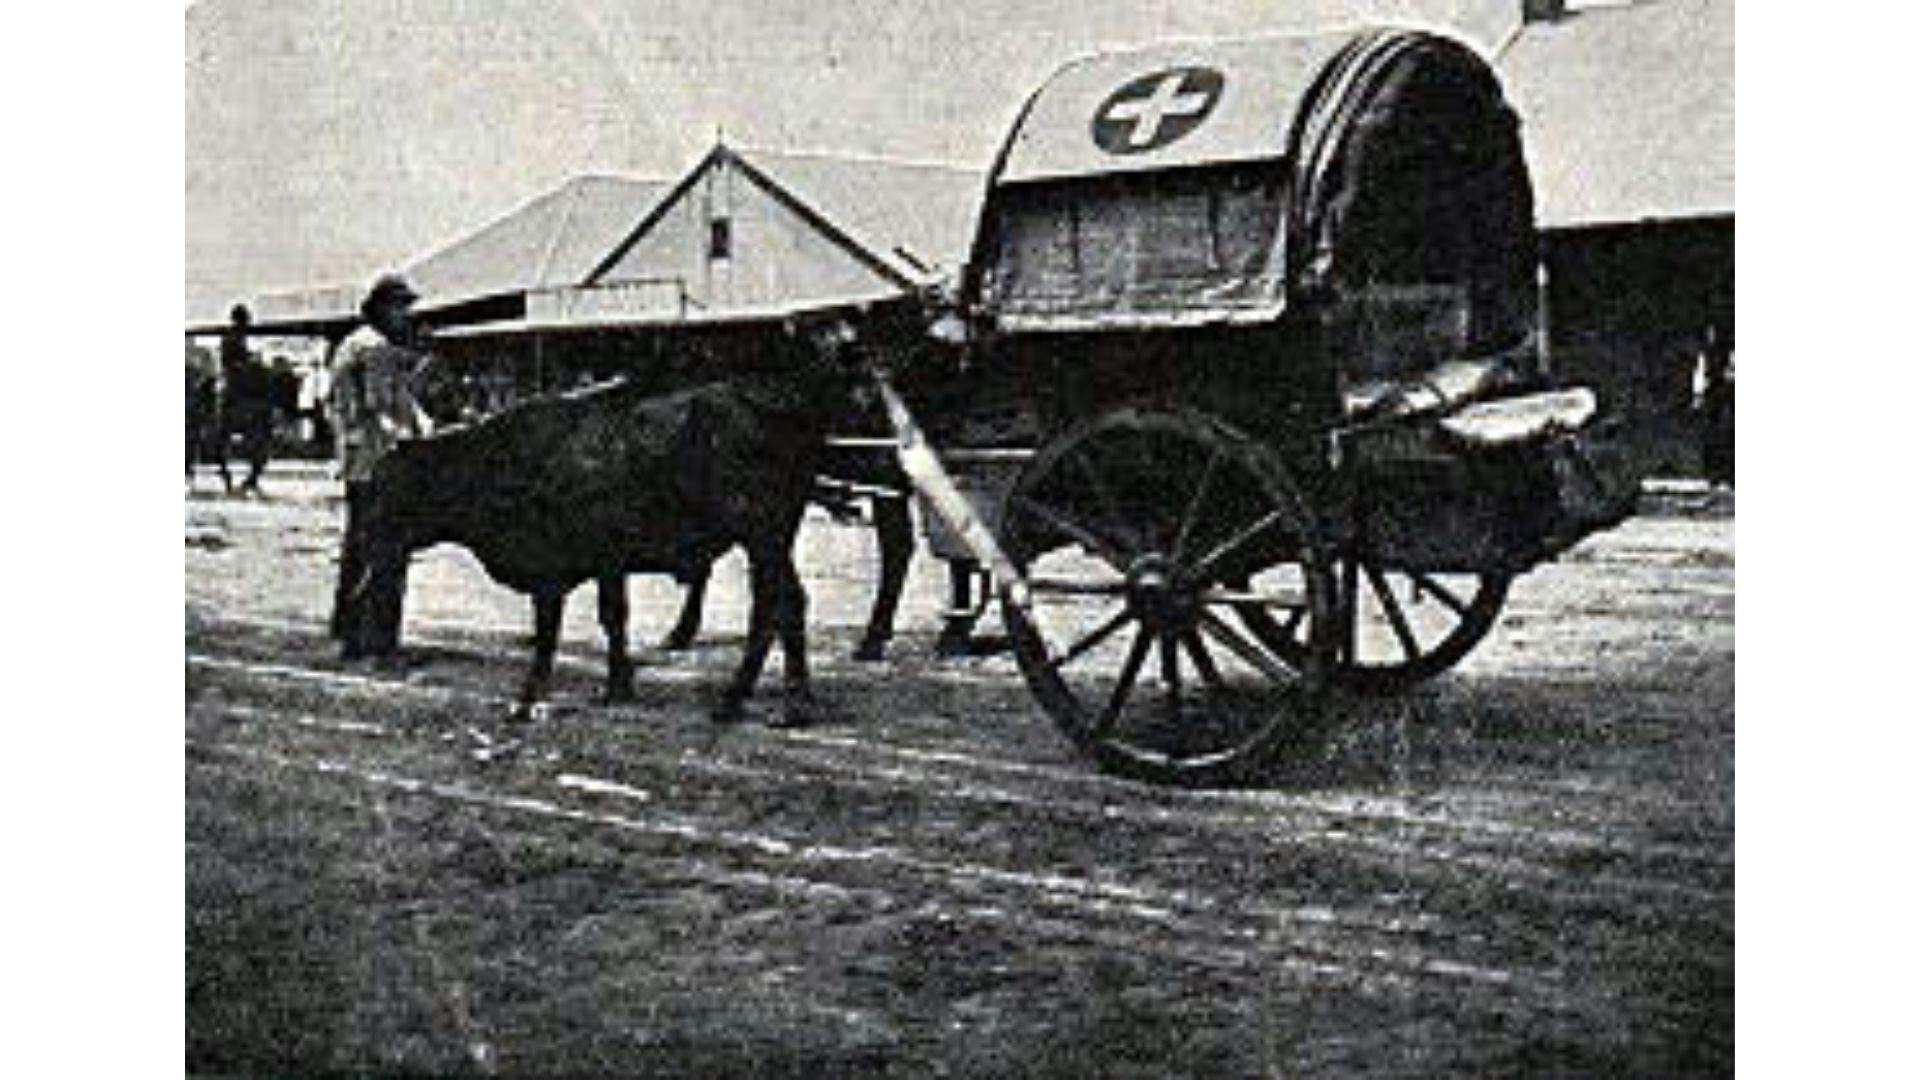 Ambulance of the Indian Stretcher Bearer Corps